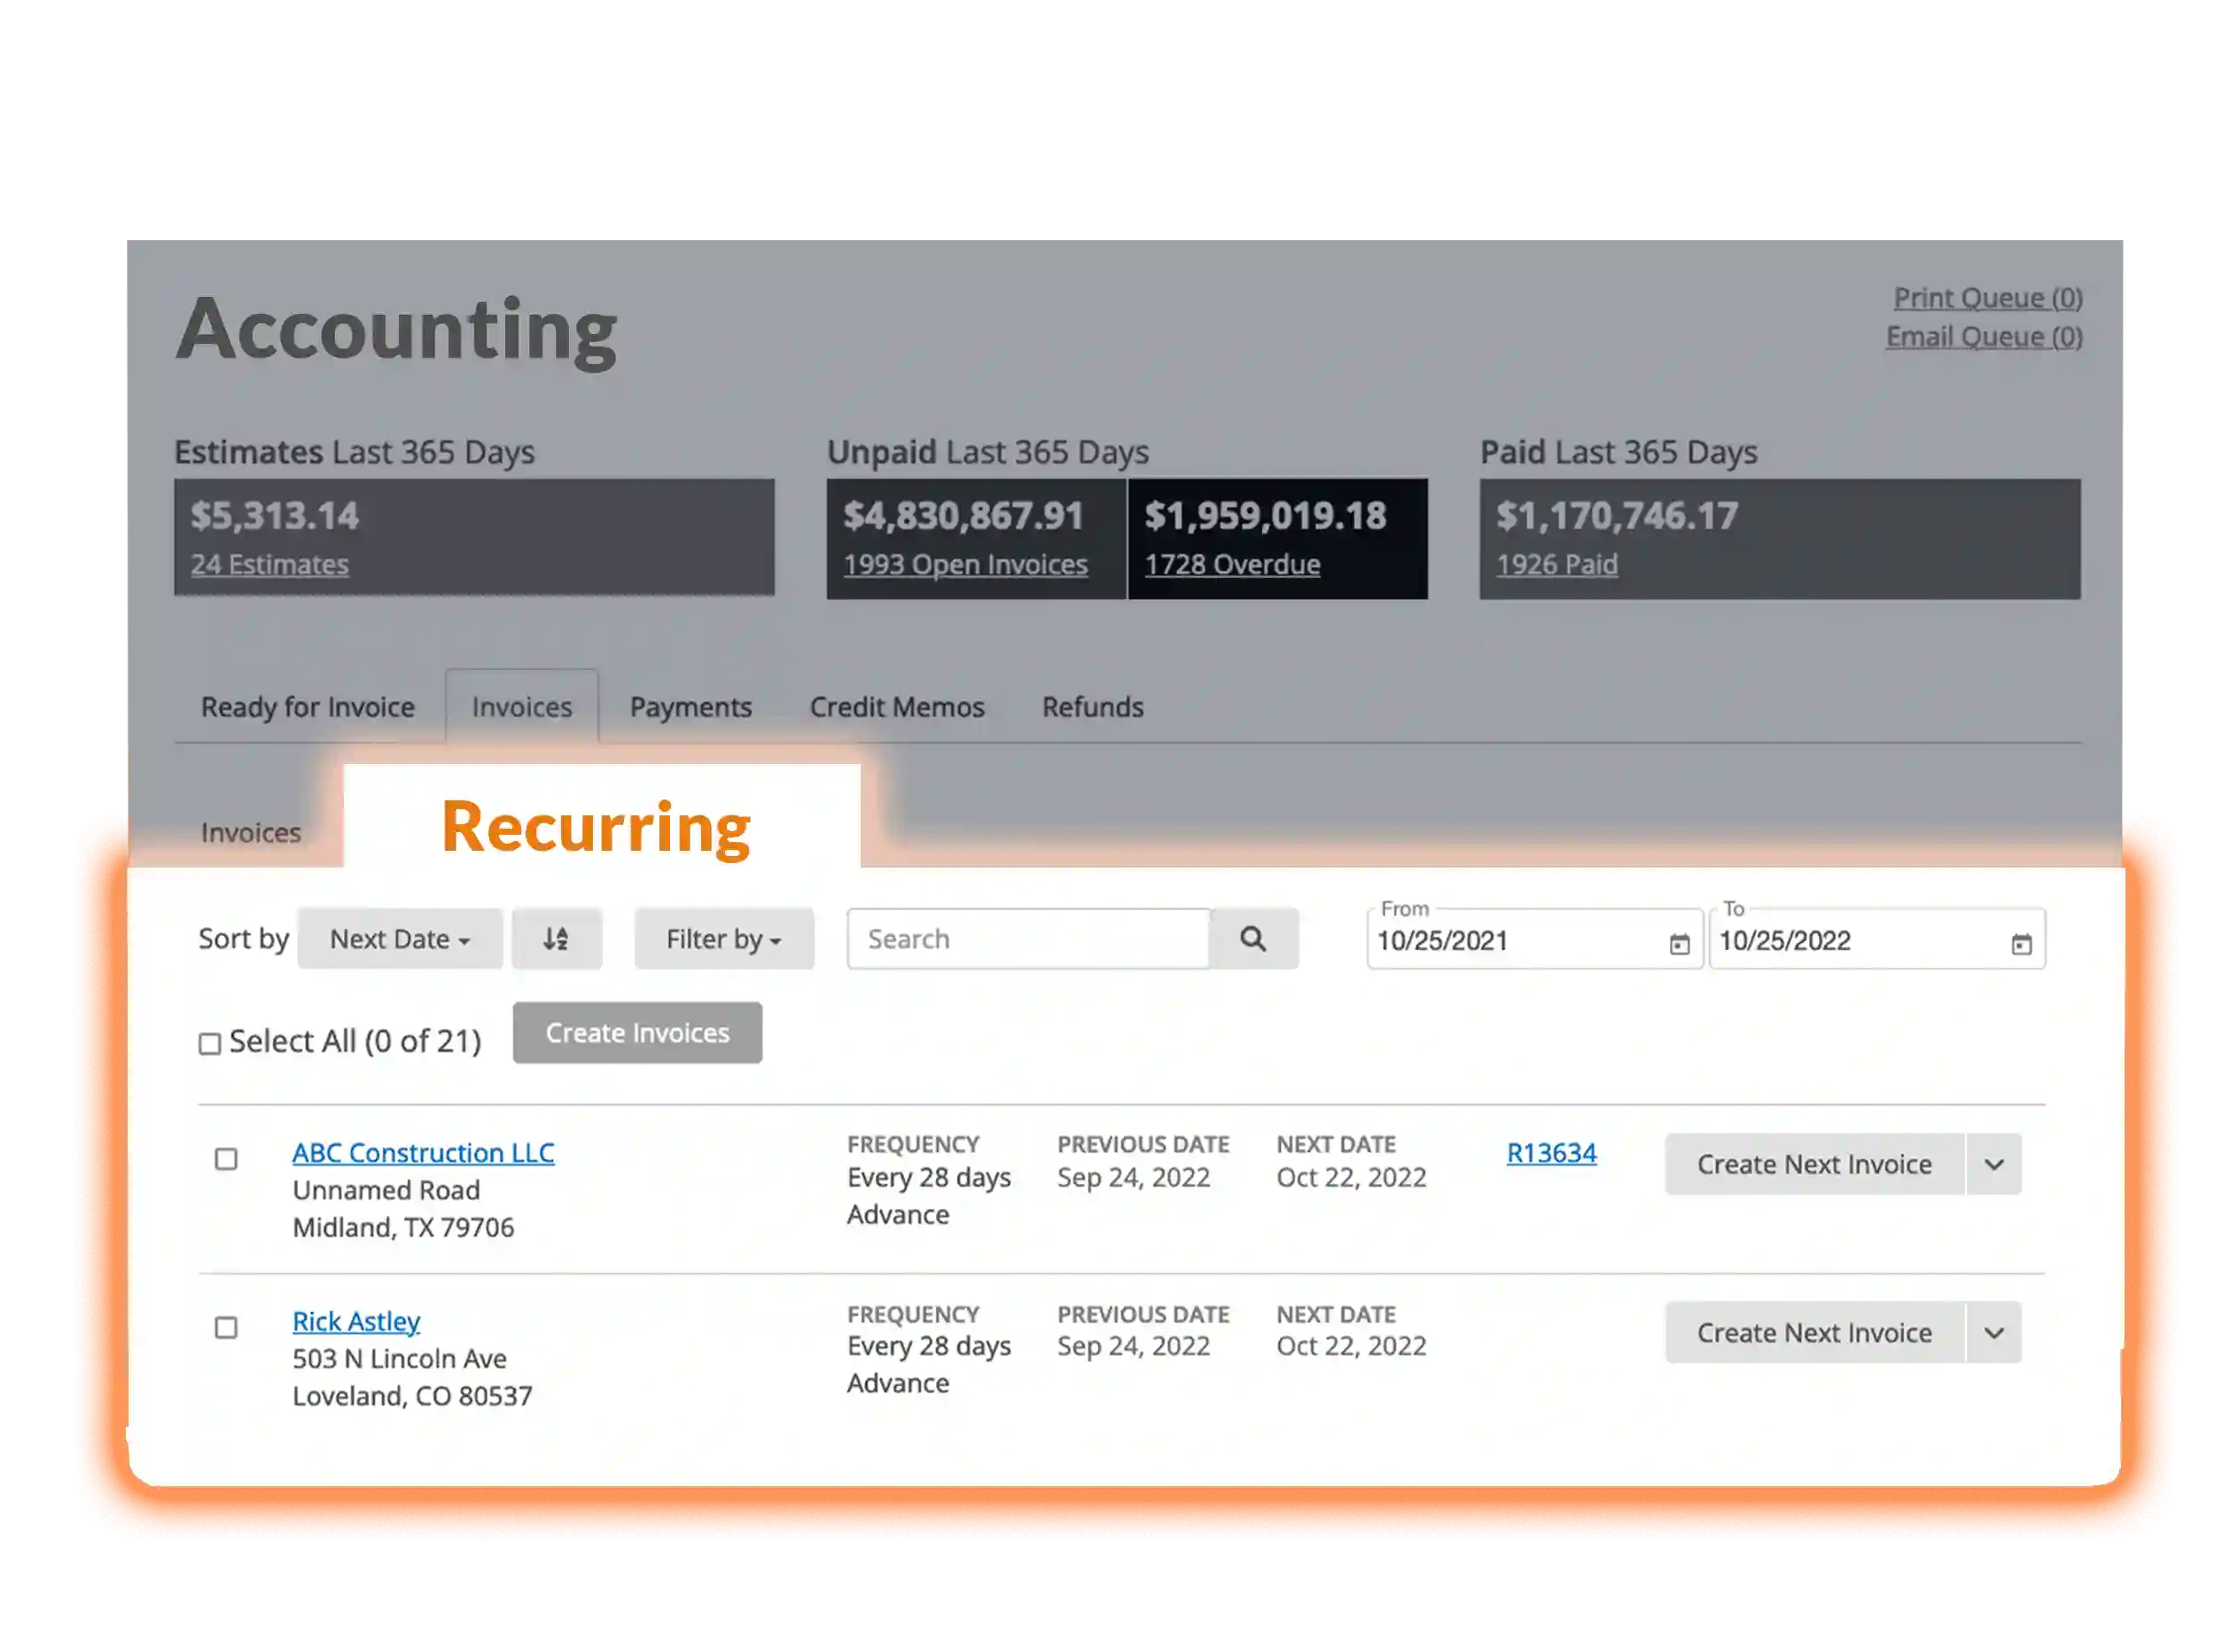 See all recurring billing info with just a click